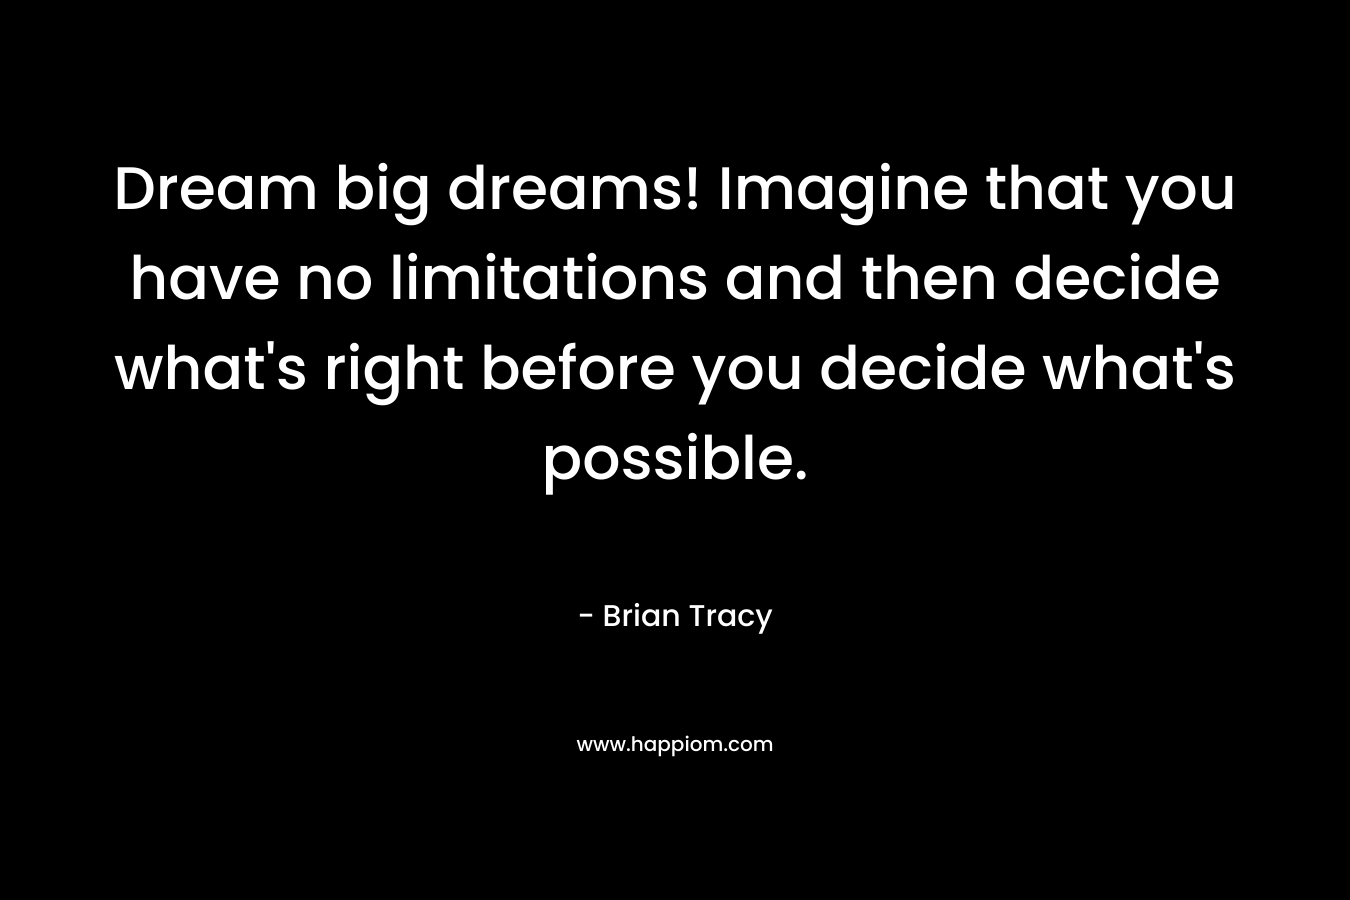 Dream big dreams! Imagine that you have no limitations and then decide what's right before you decide what's possible.